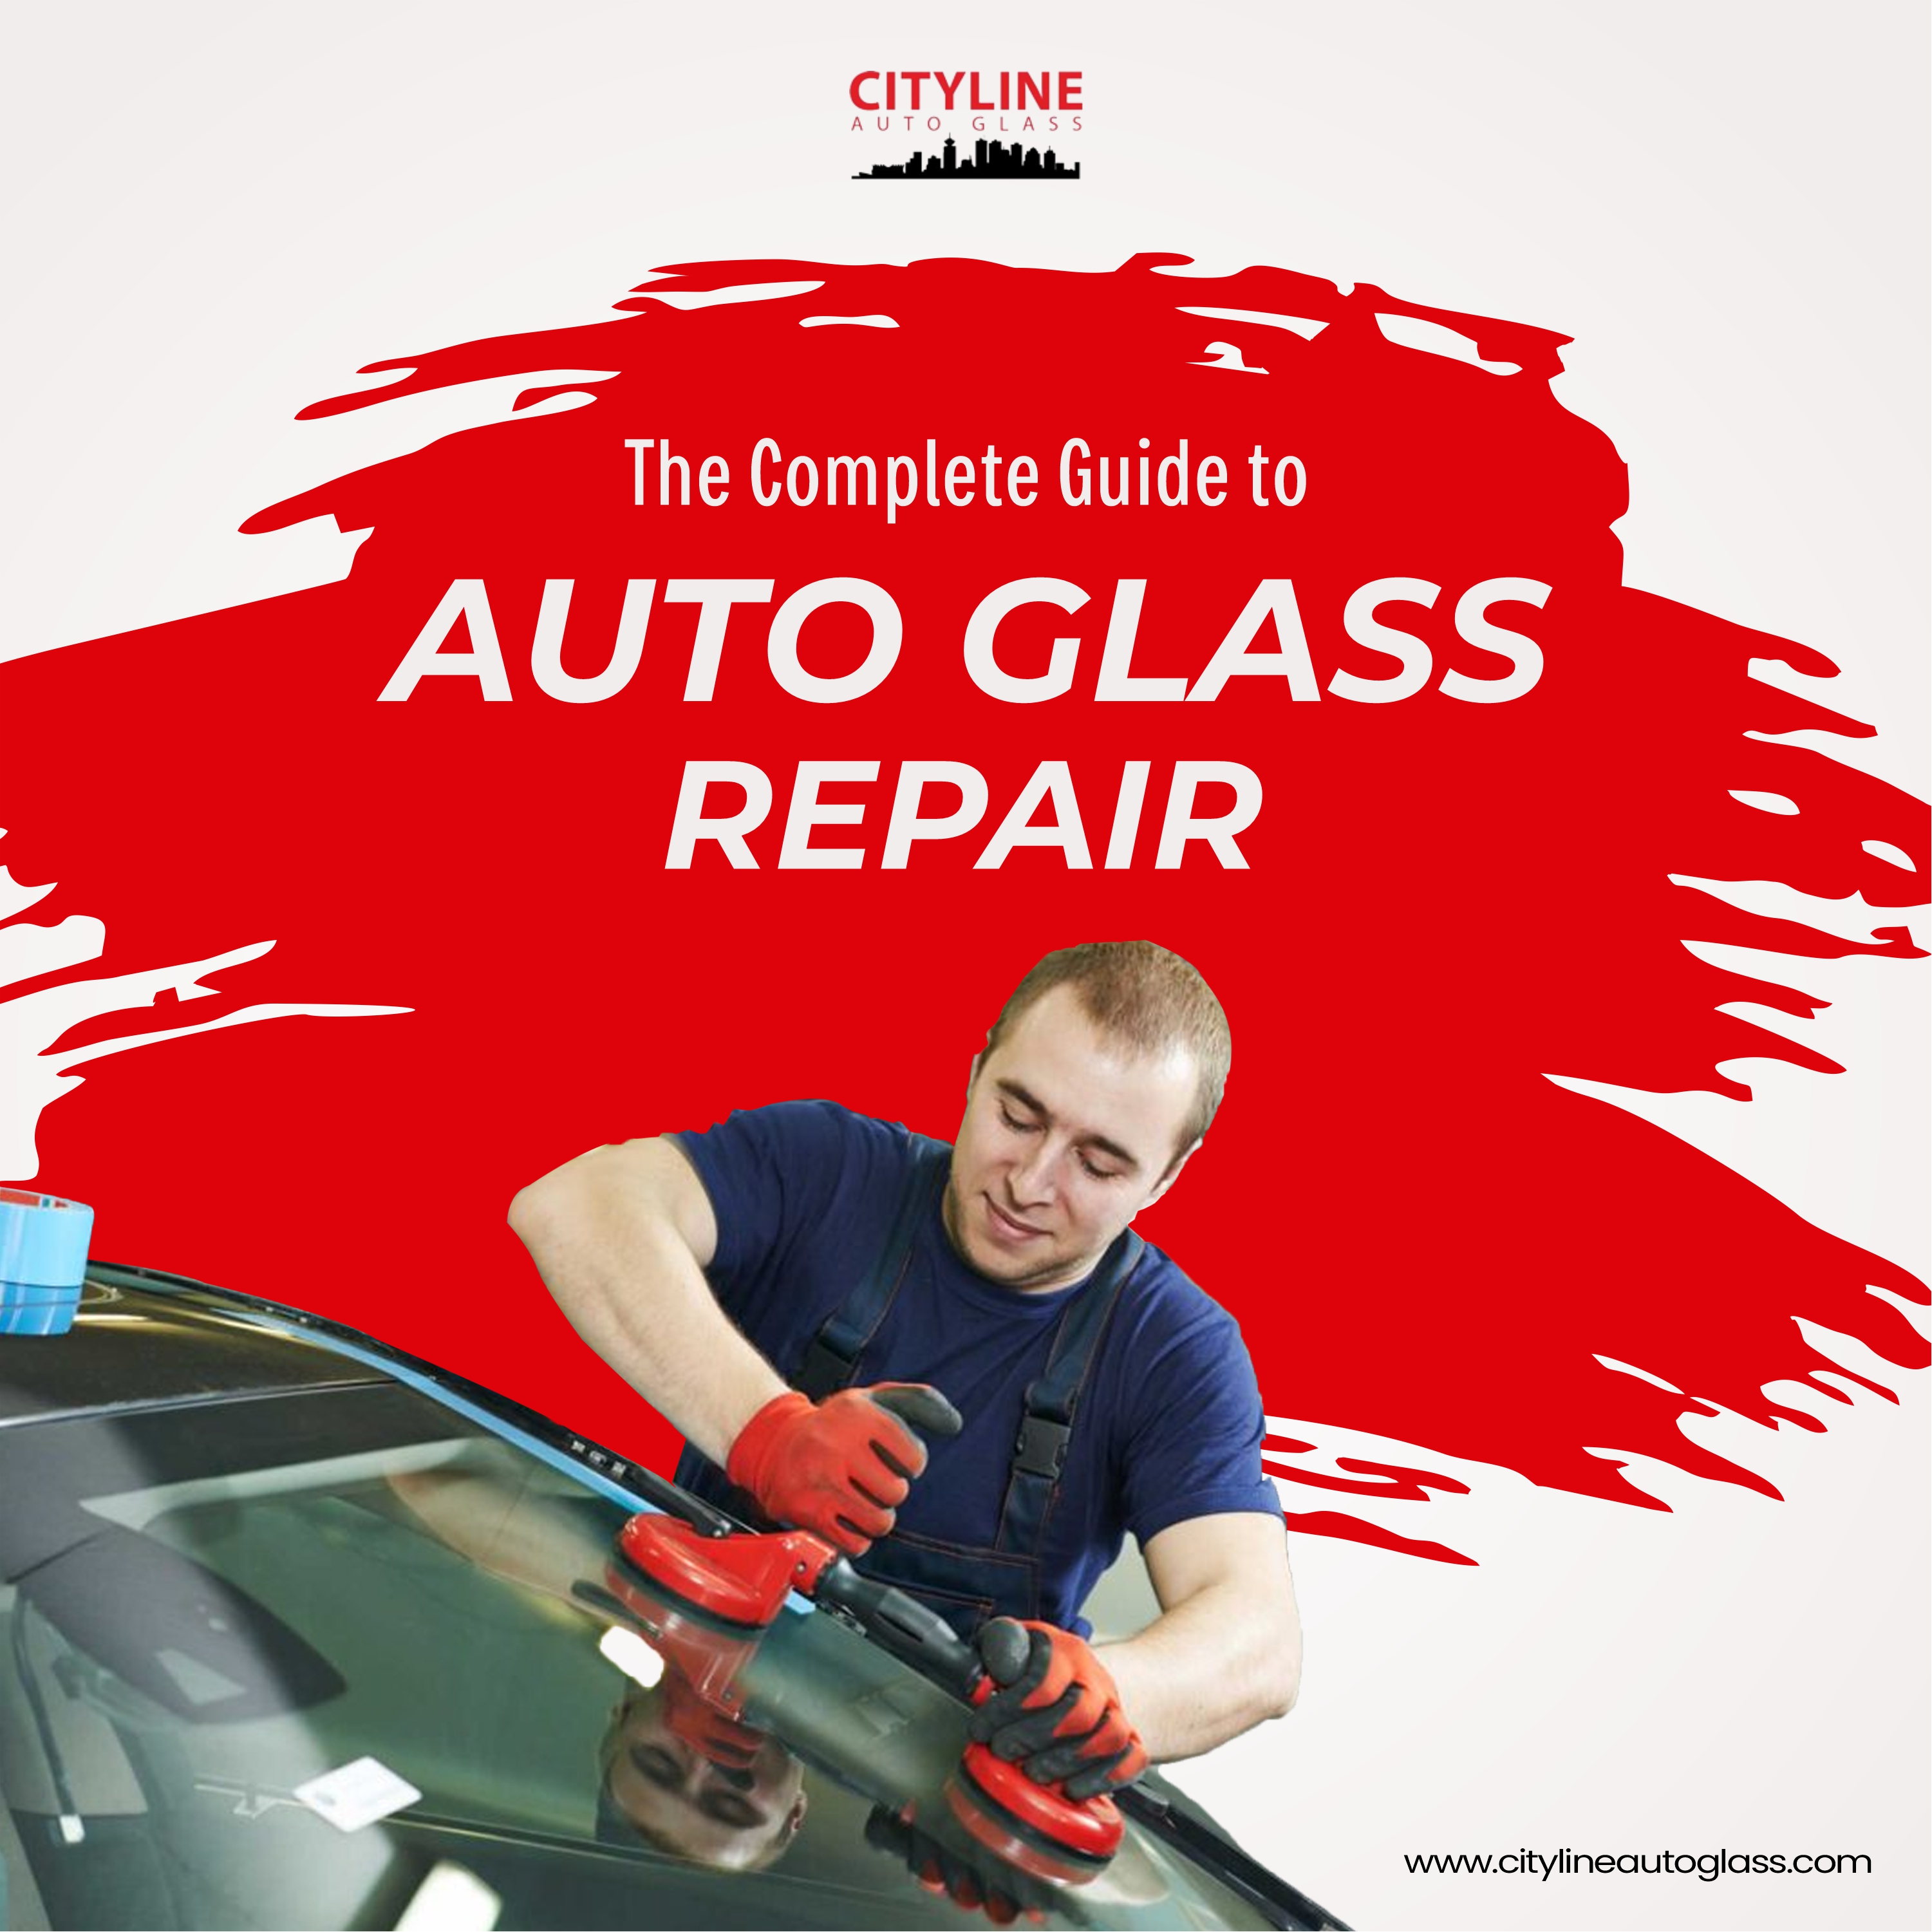 Complete Guide to Auto Glass Repair